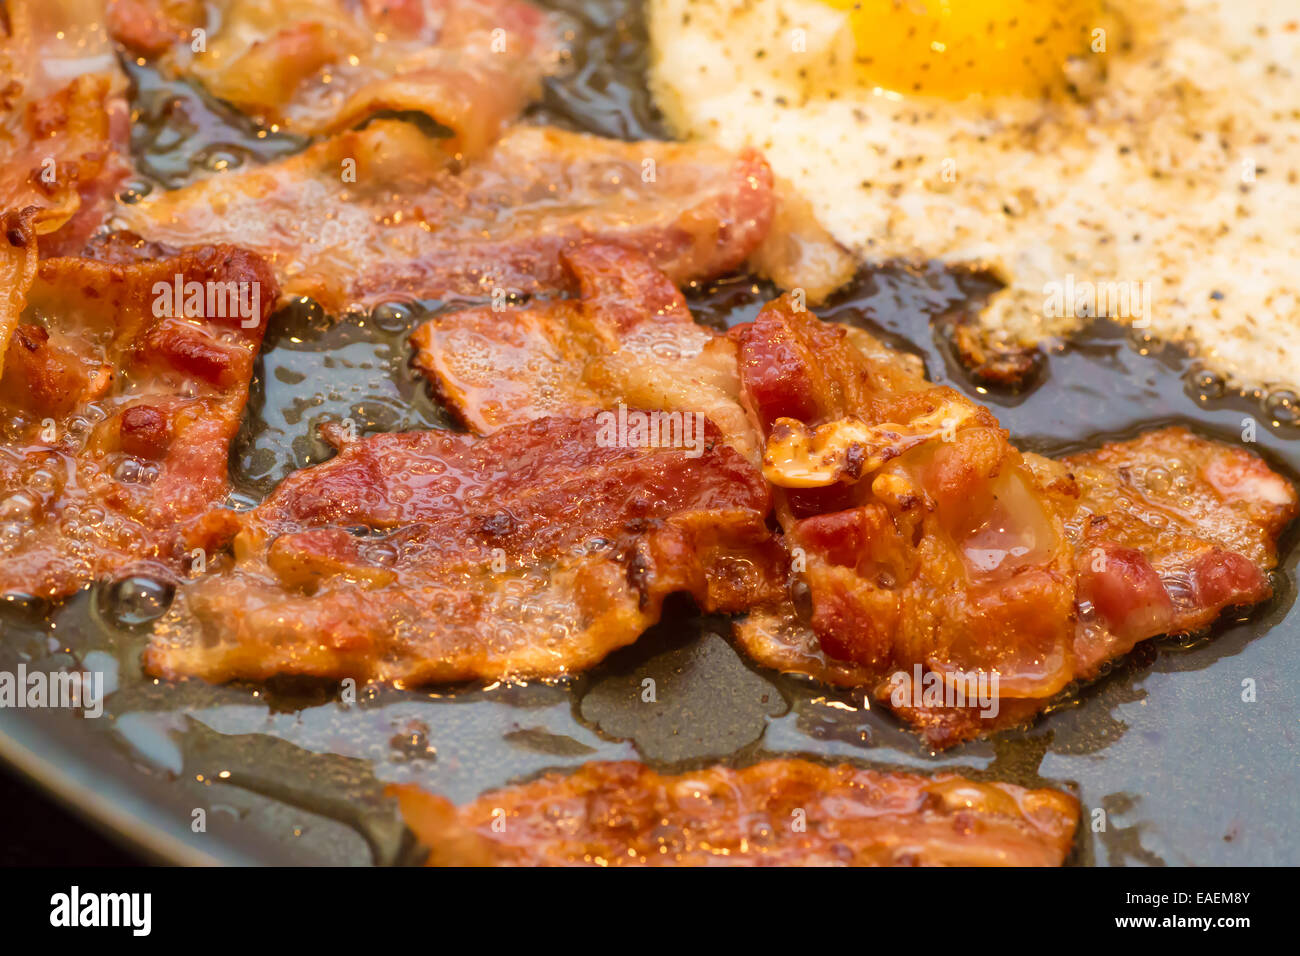 A greasy breakfast of fried bacon and an egg frying in a frying pan. Stock Photo